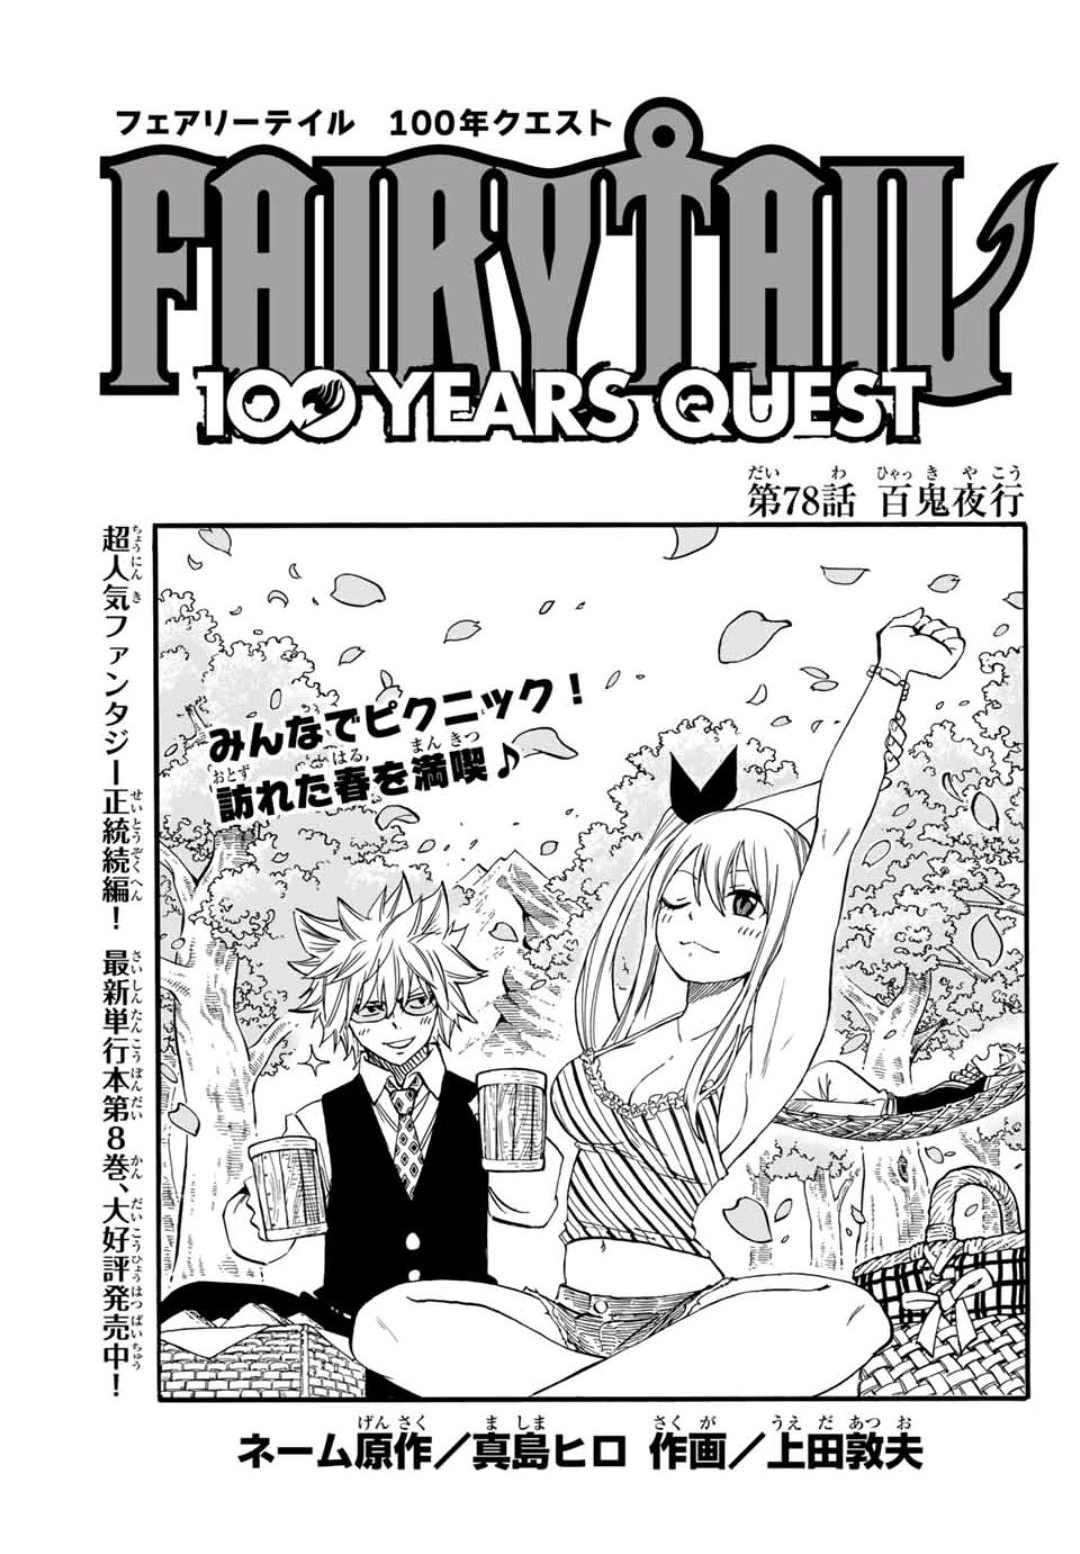 Fairy Tail: 100 Years Quest Chapter 78 | Fairy Tail Wiki | Fandom